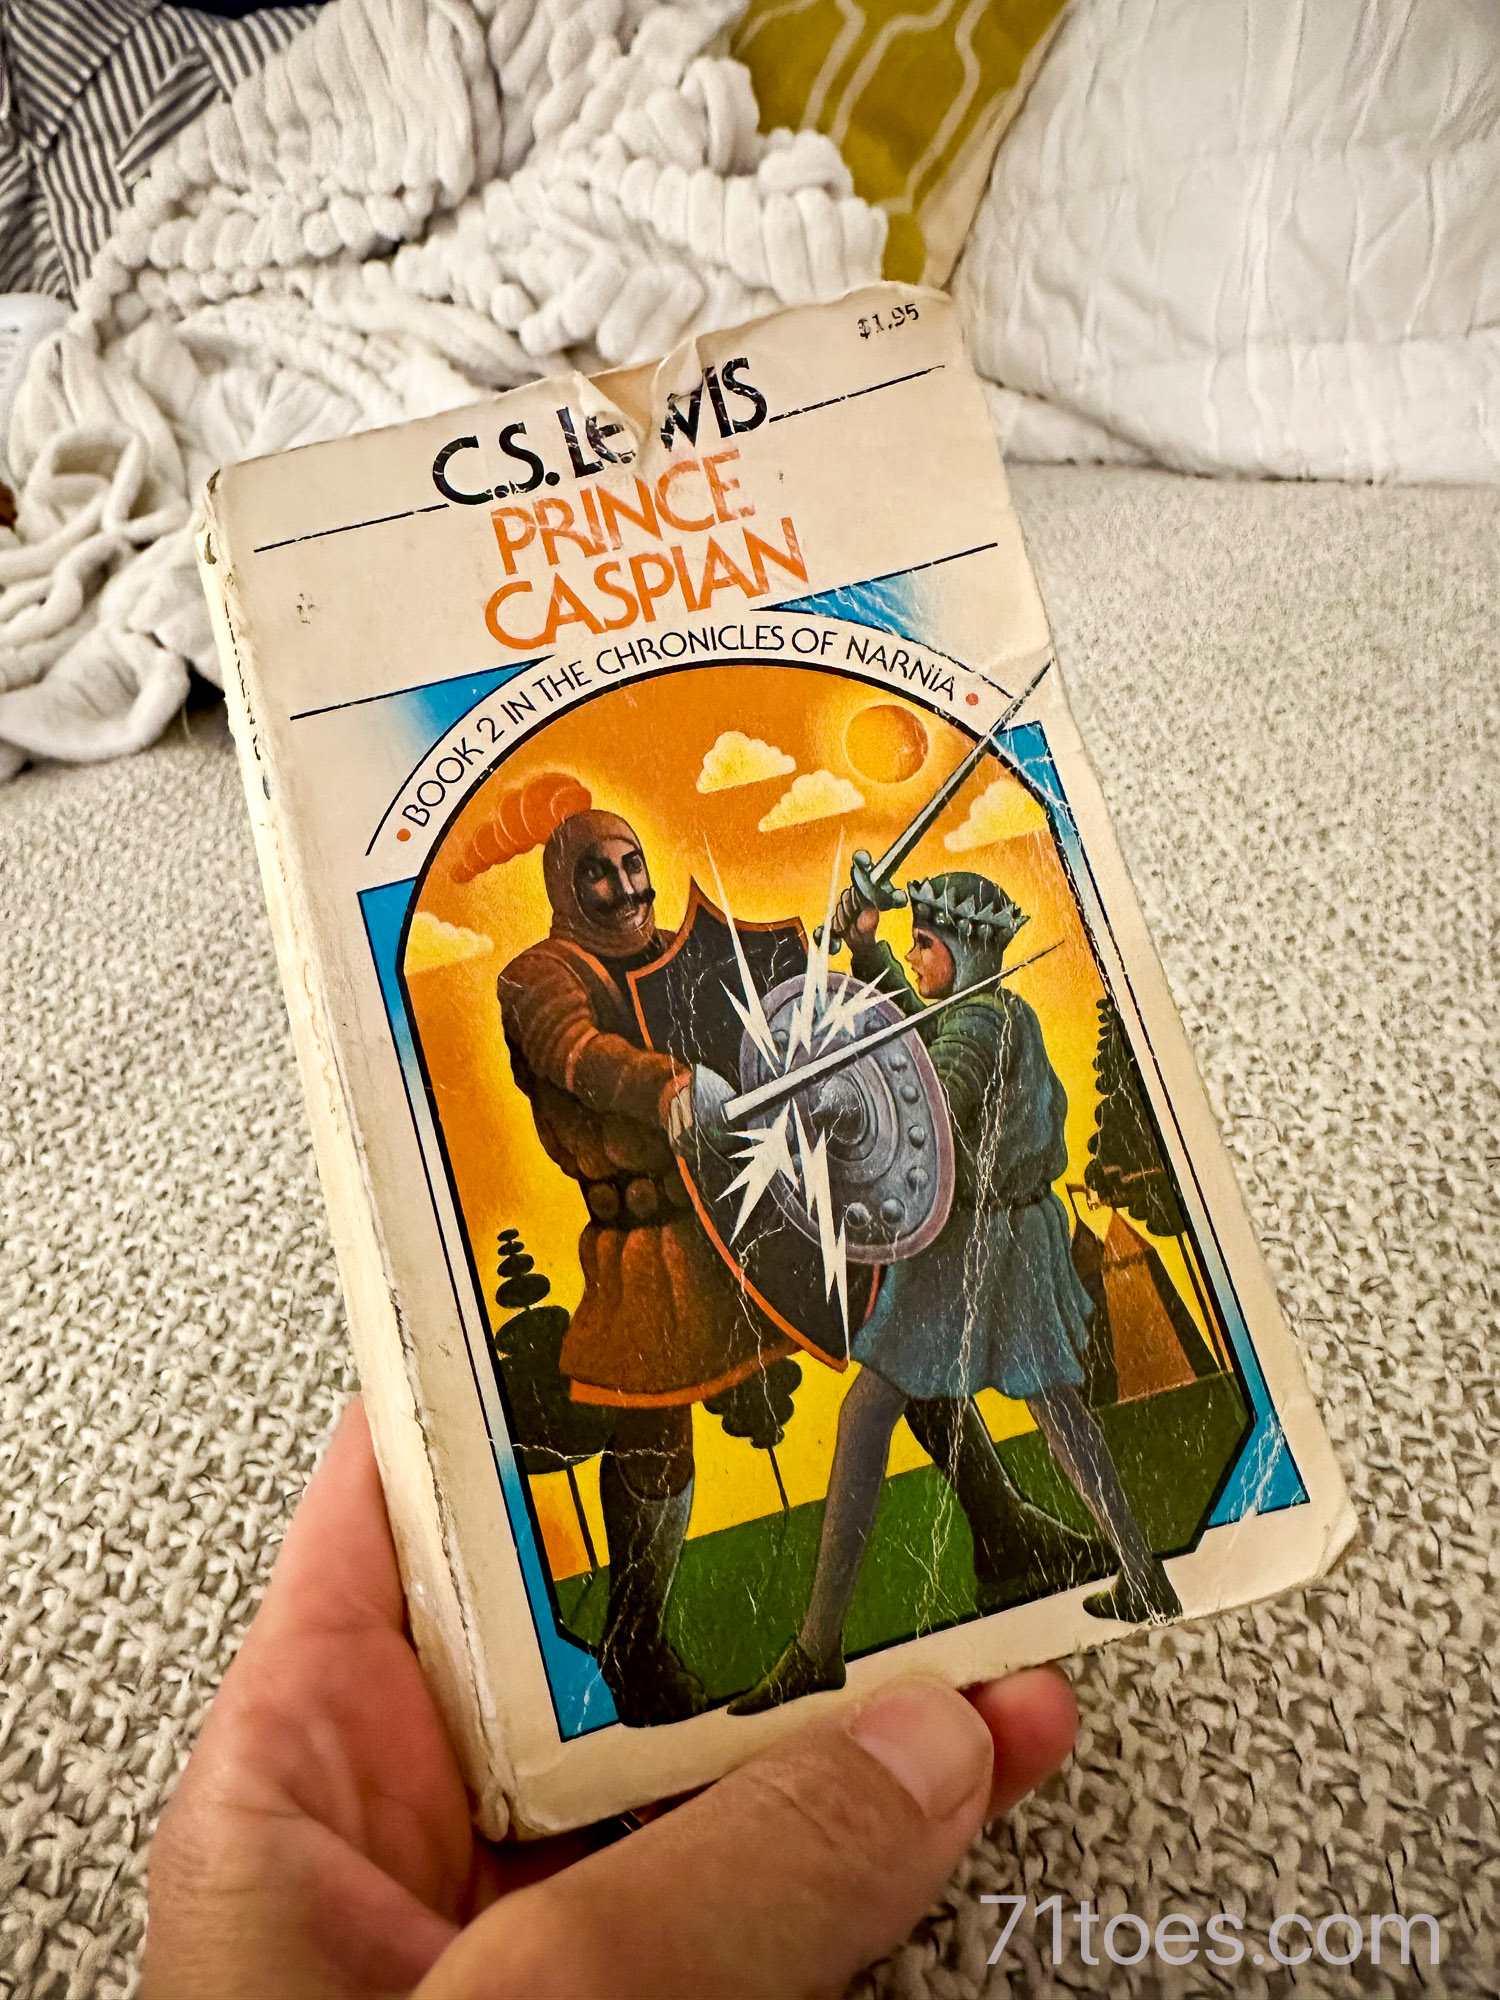 A picture of the book called "Prince Caspian"